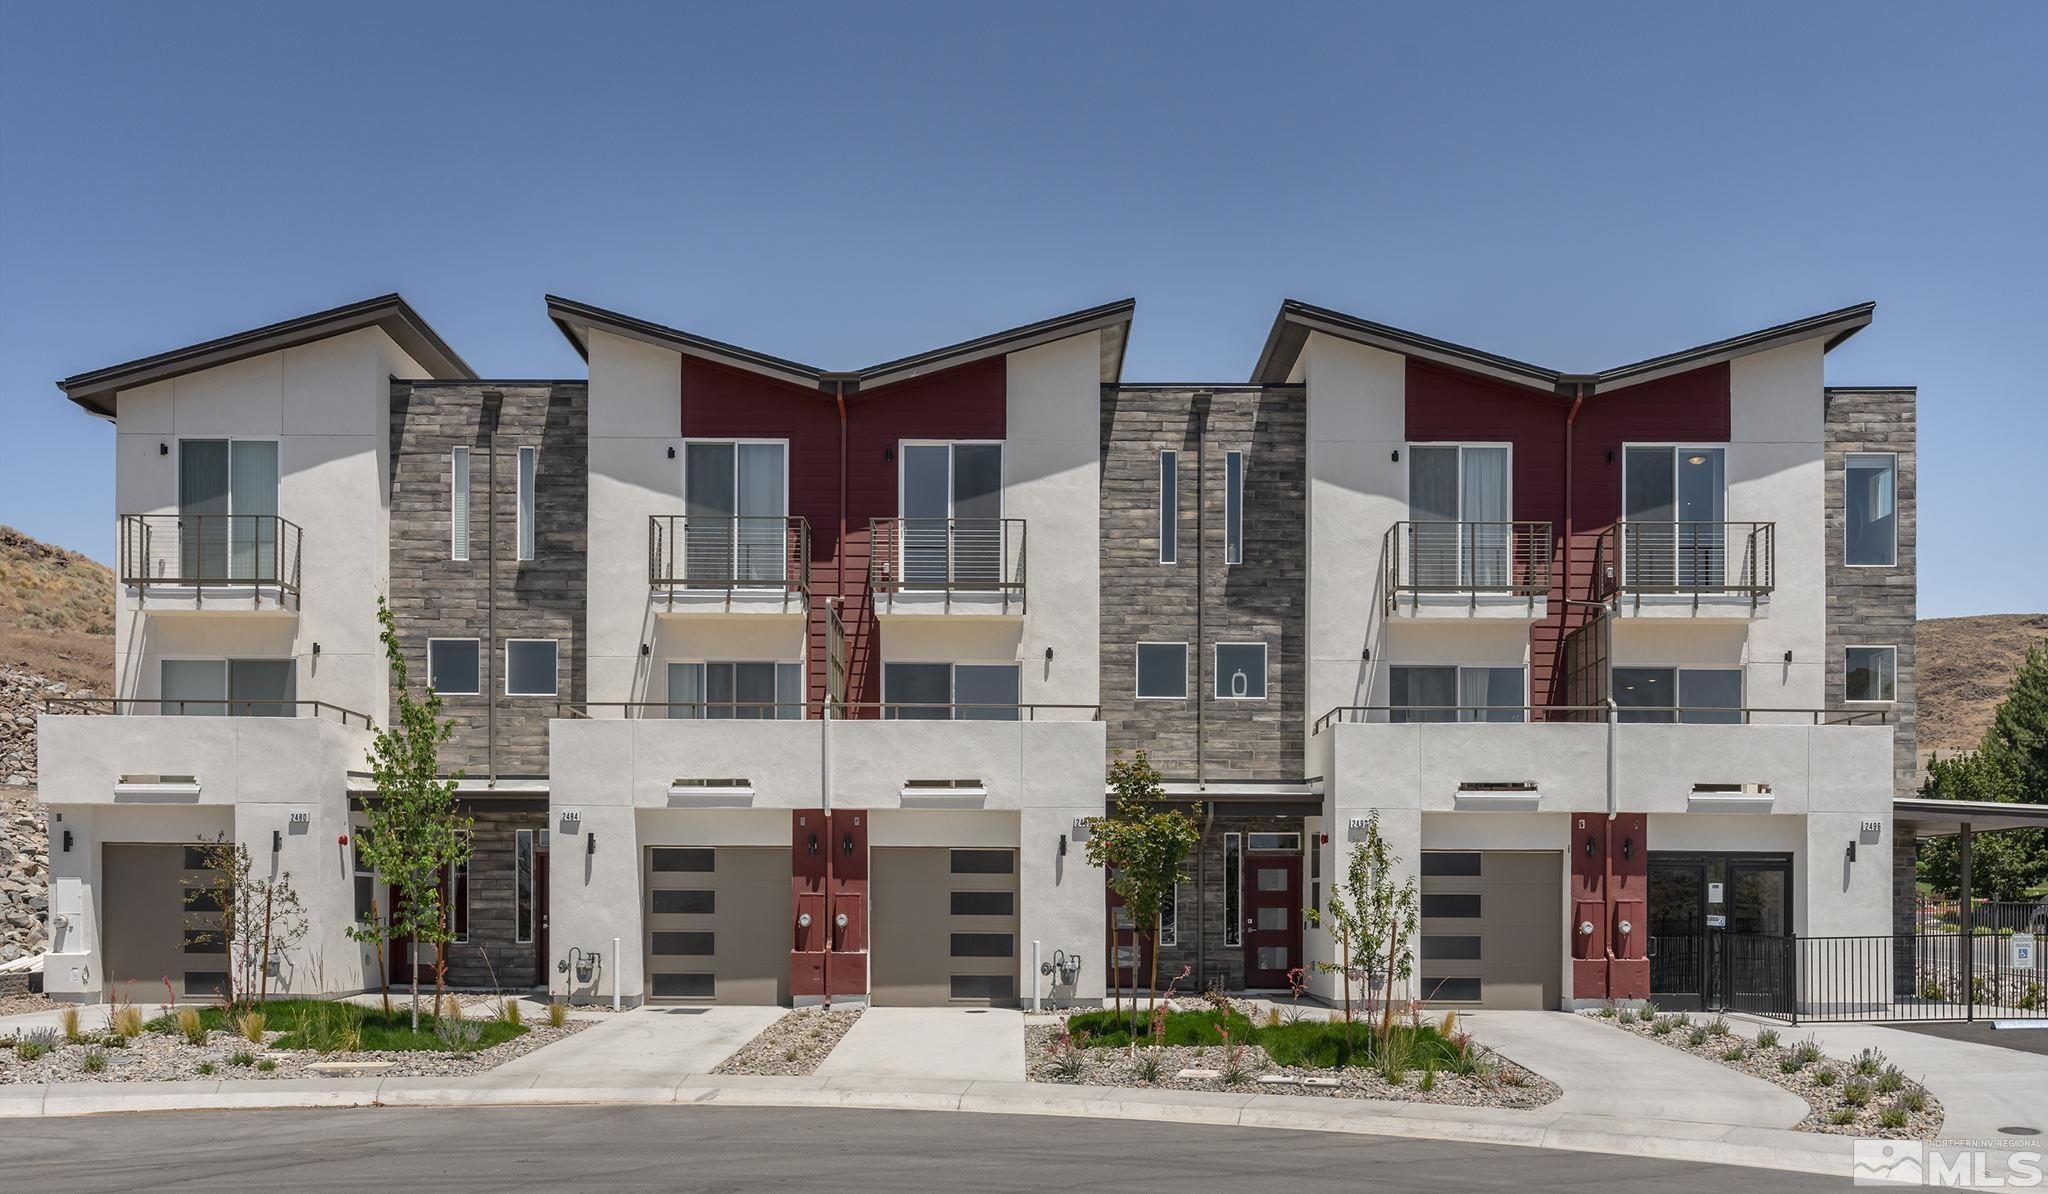 Condos, Lofts and Townhomes for Sale in New Construction Condos in the Reno Area